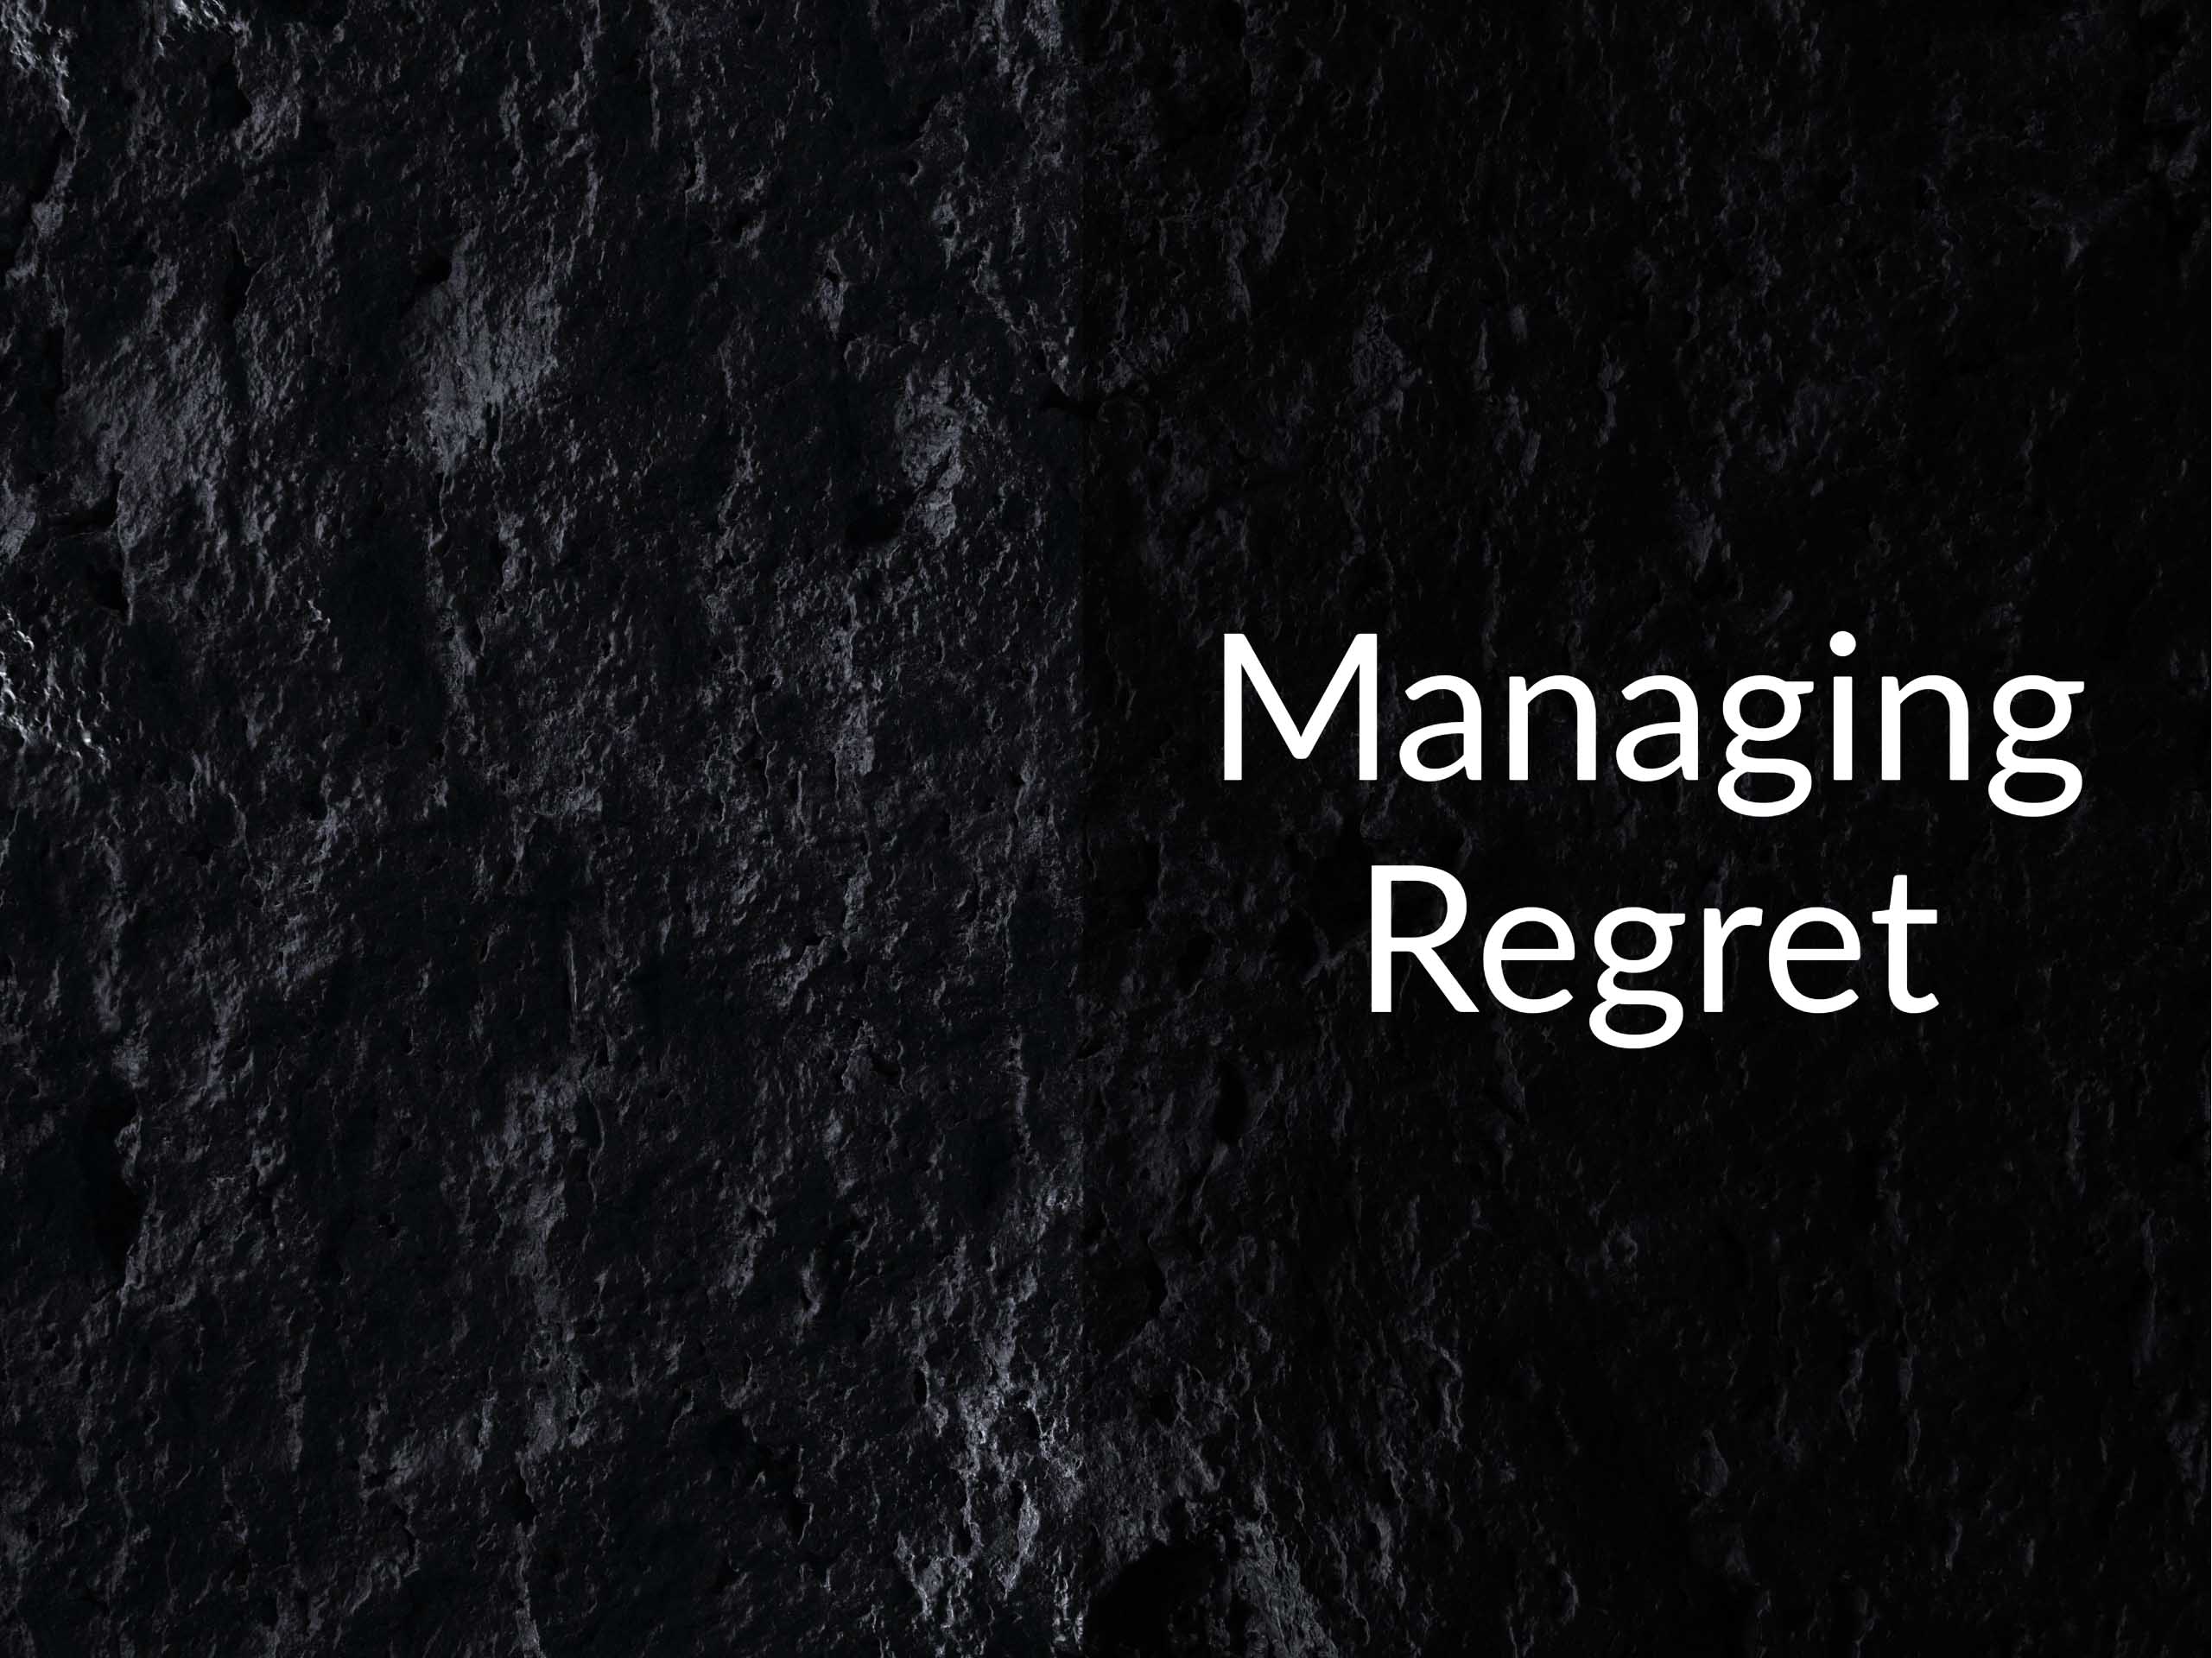 Dark lava rock with the caption "Managing Regrets"